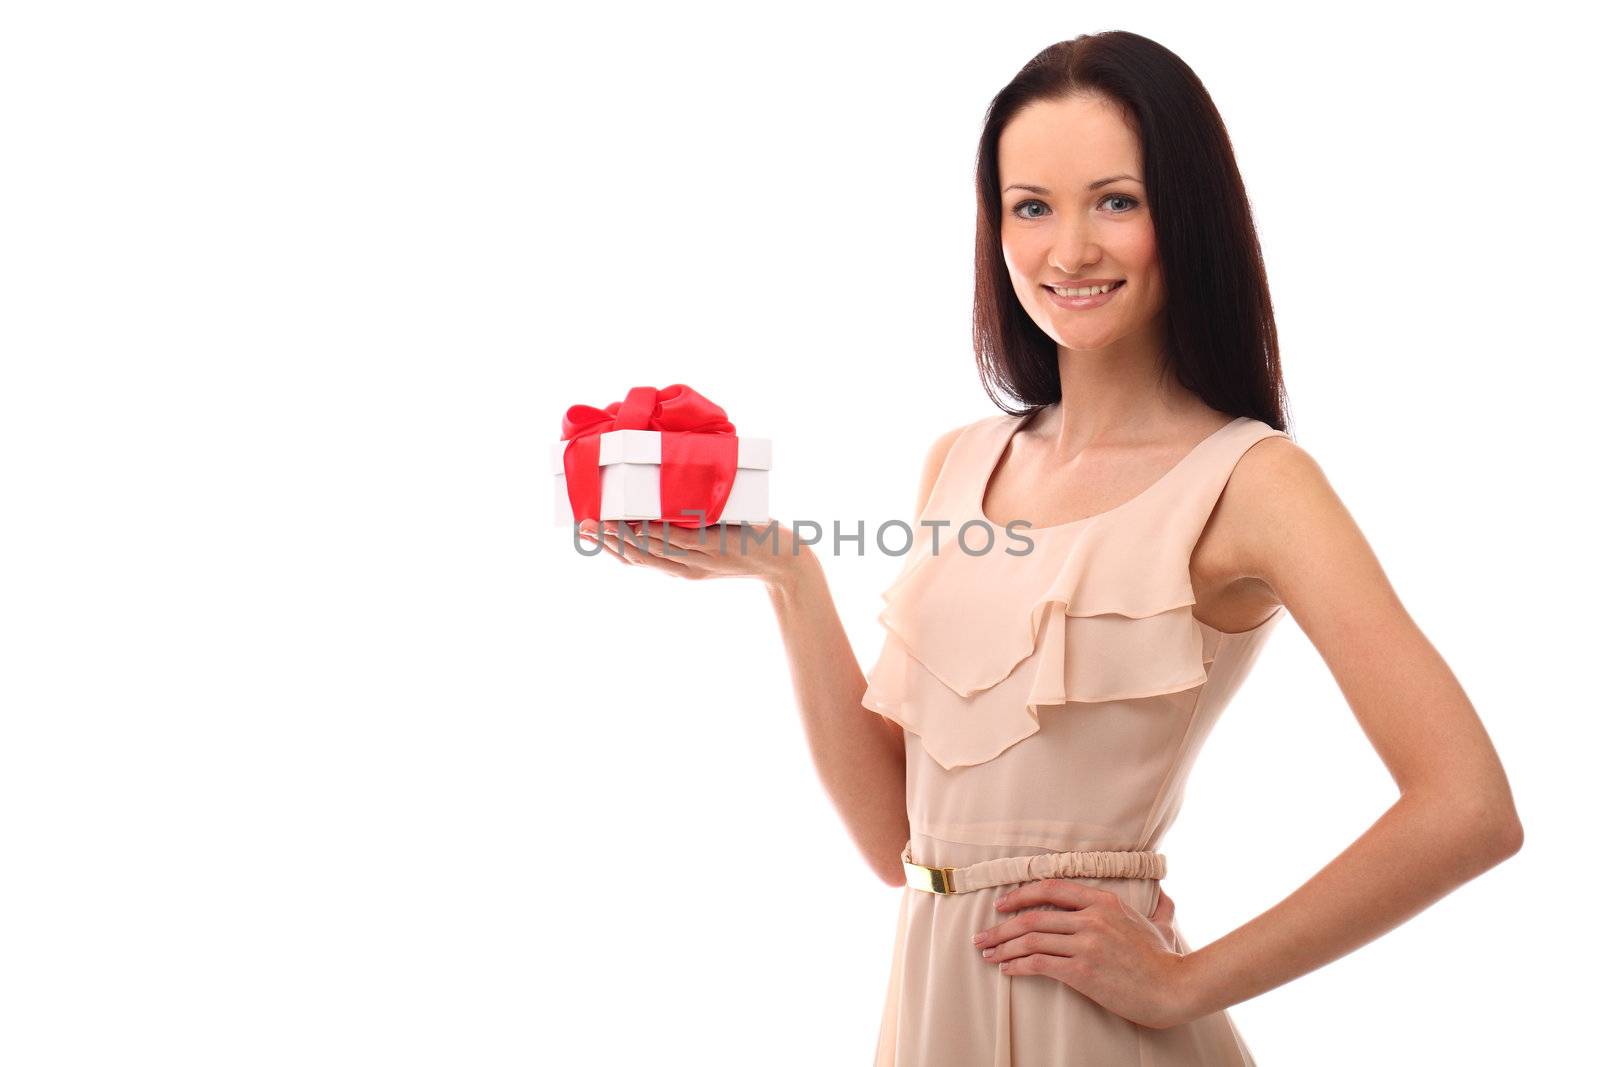 Beautiful young girl smiling and holding gift over a white background